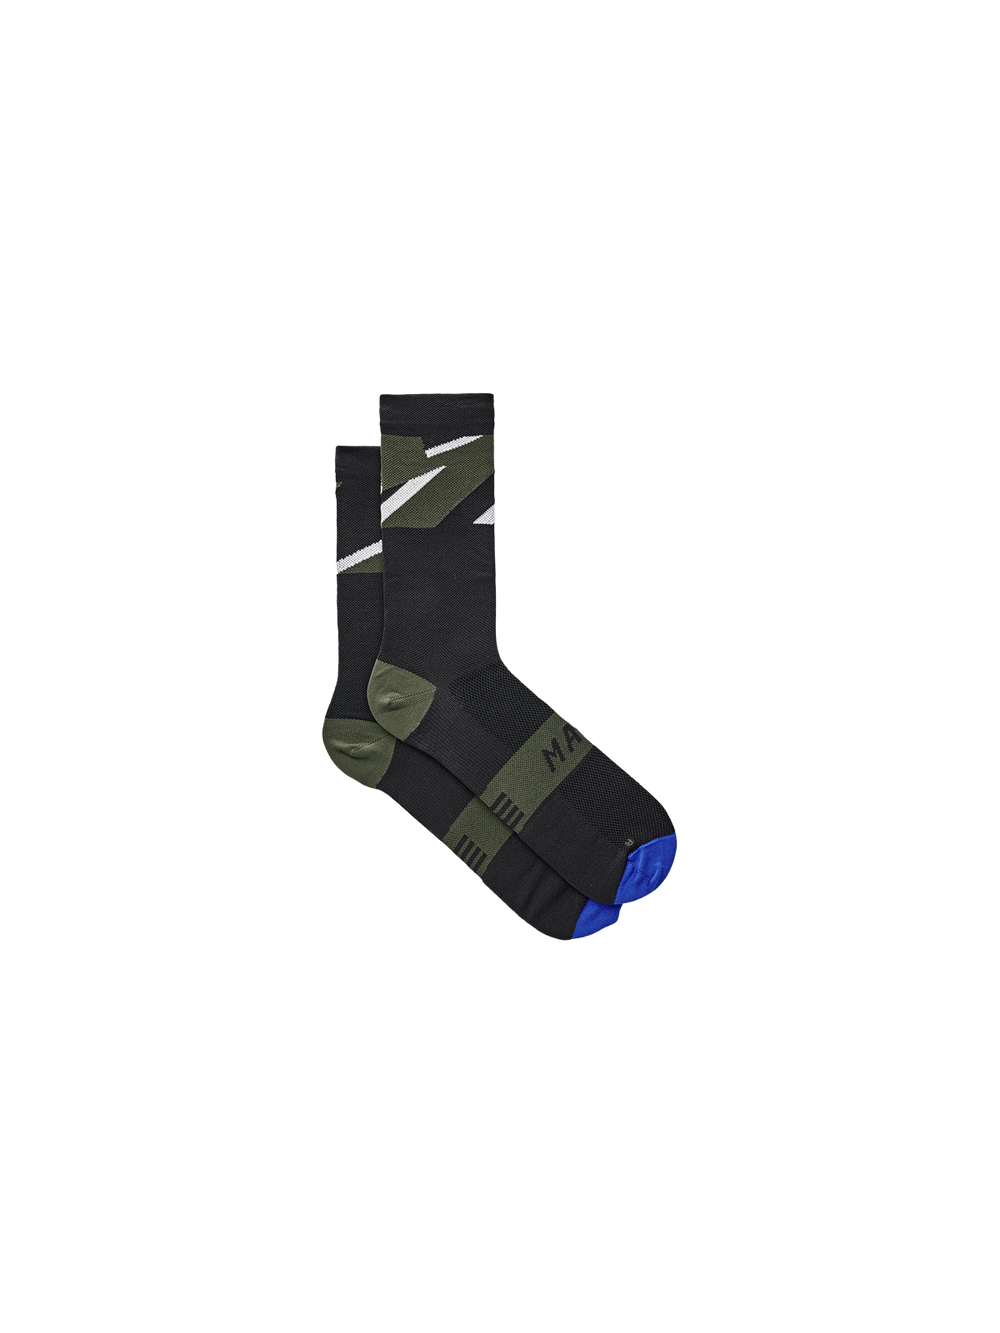 Product Image for Evolve 3D Sock